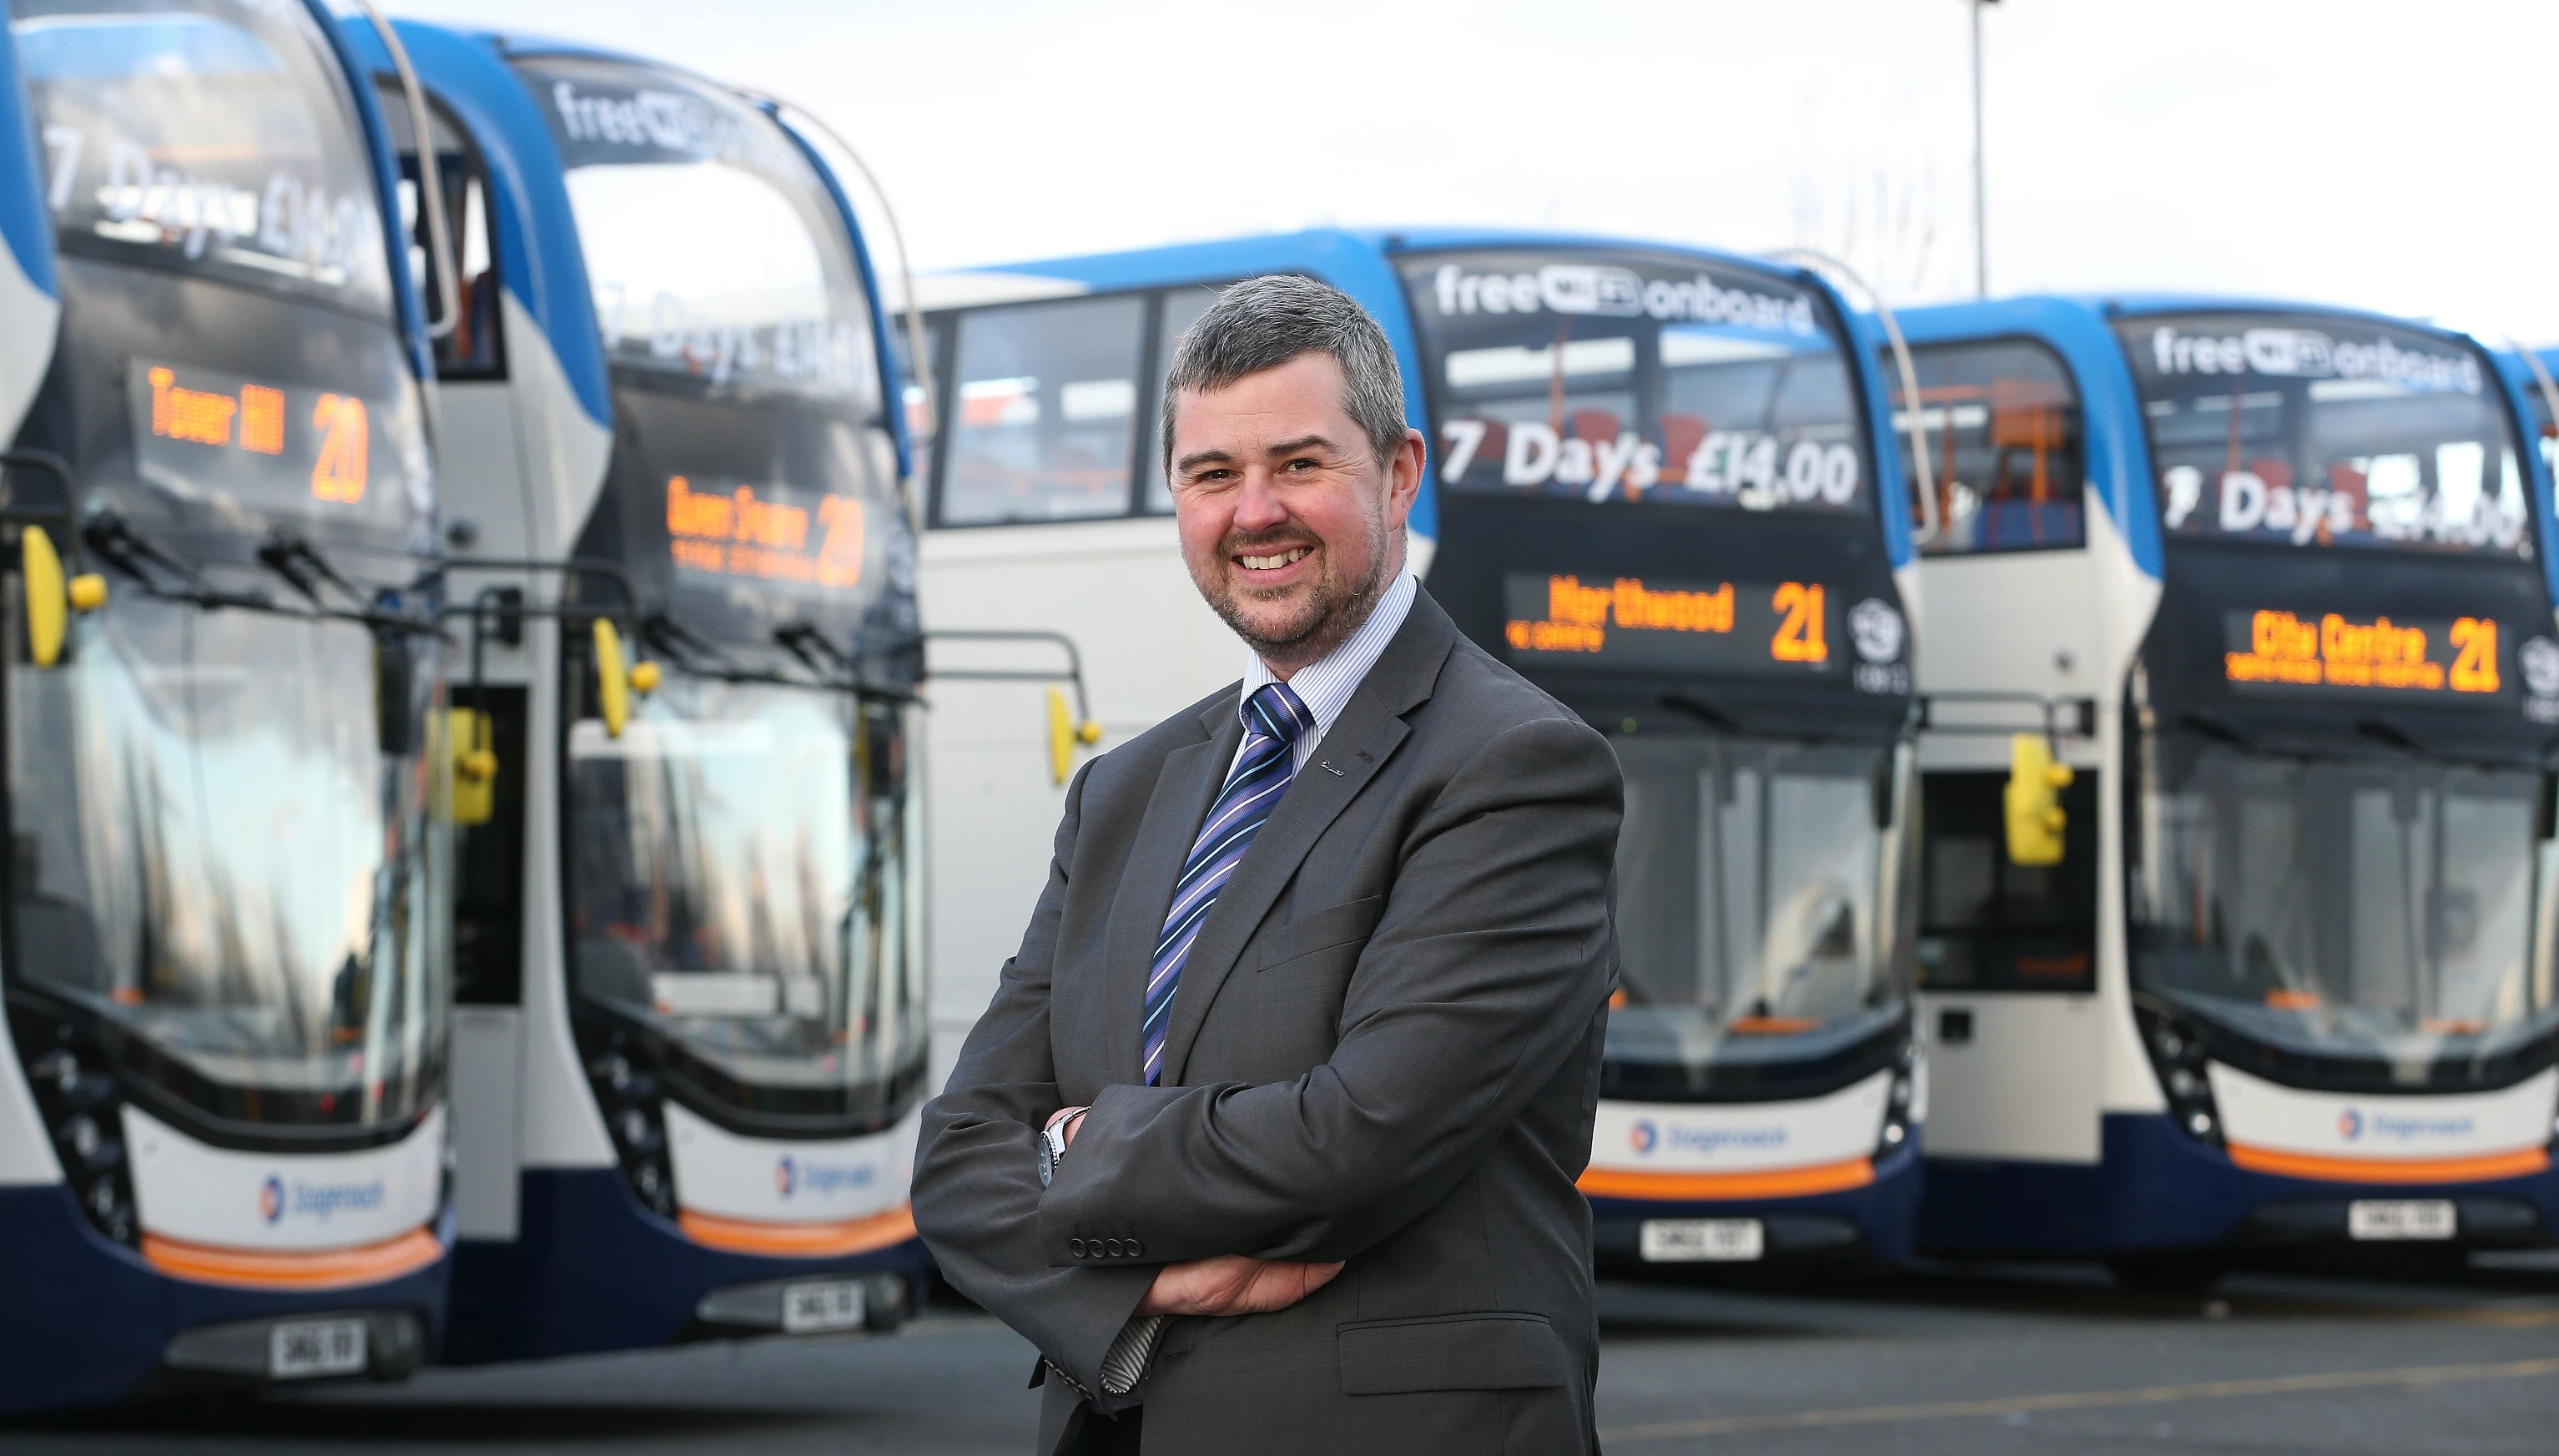 Rob Jones, managing director at Stagecoach Merseyside and South Lancashire